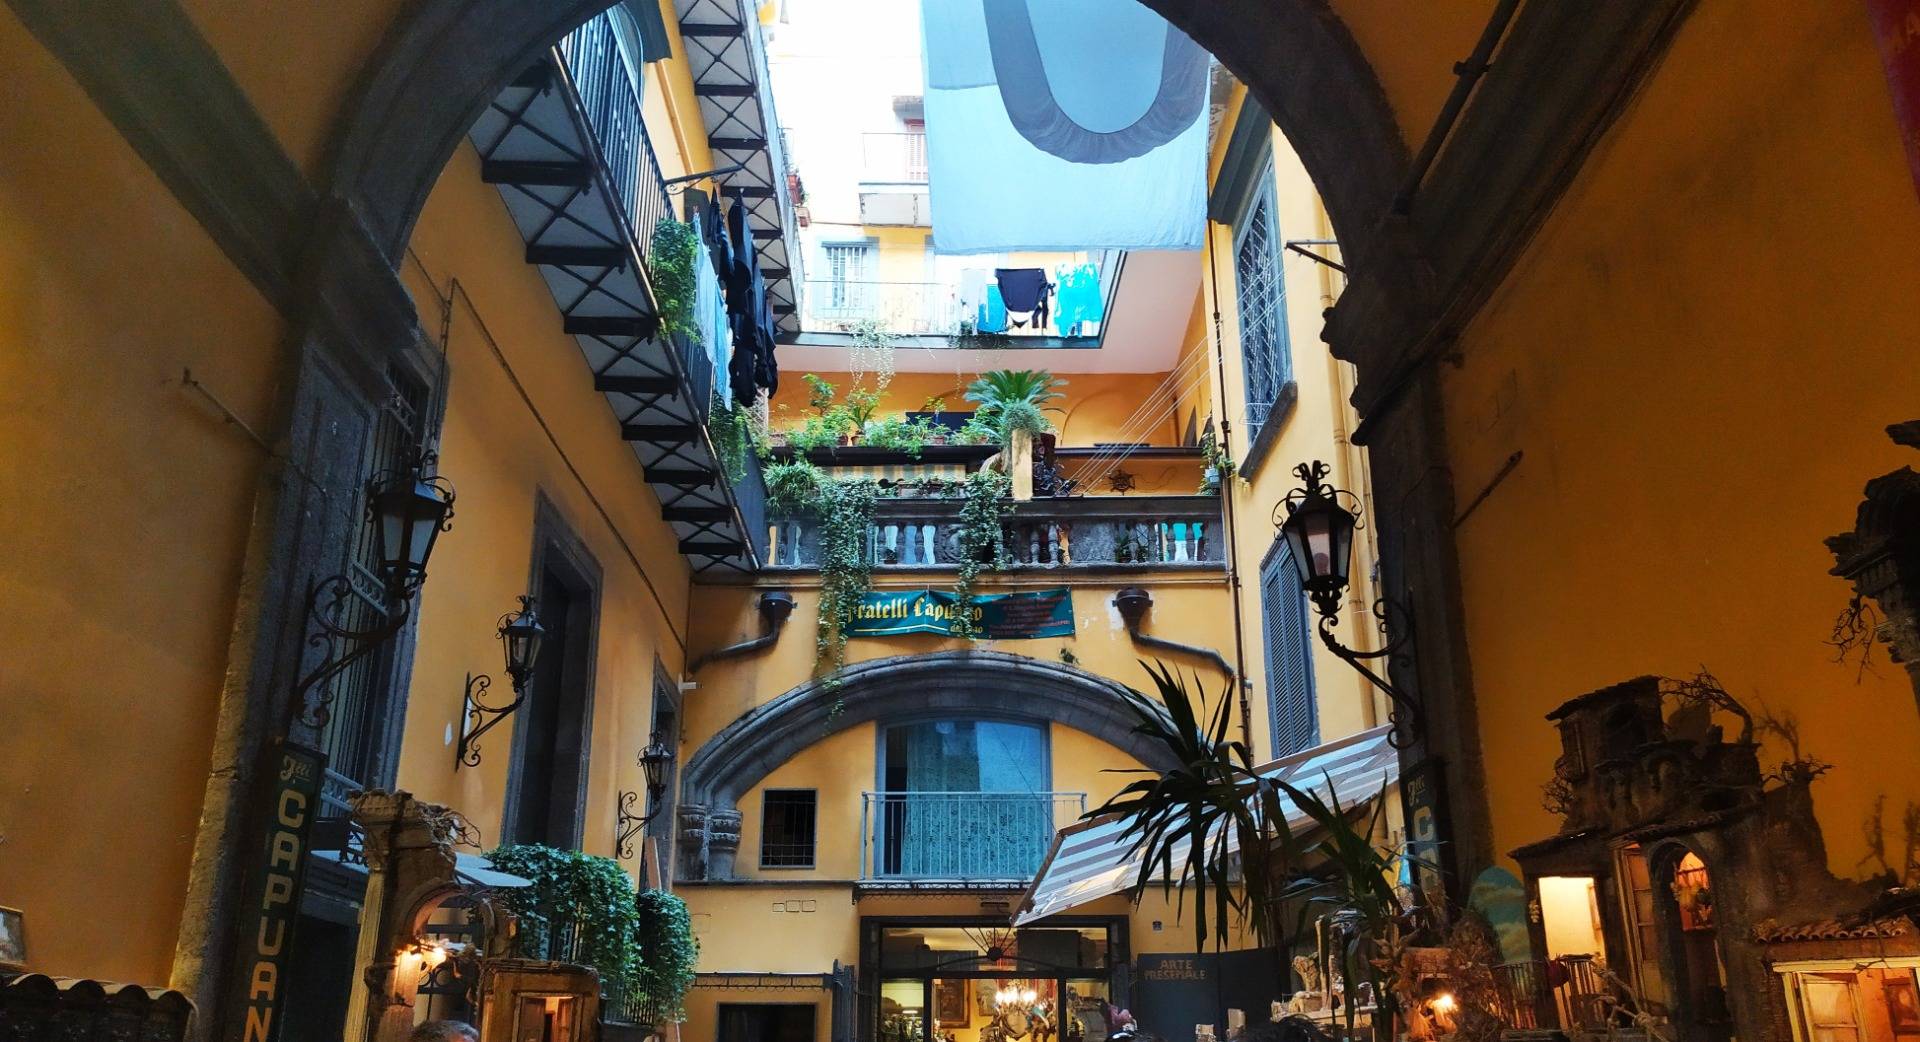 Spaccanapoli: the historic center of Naples